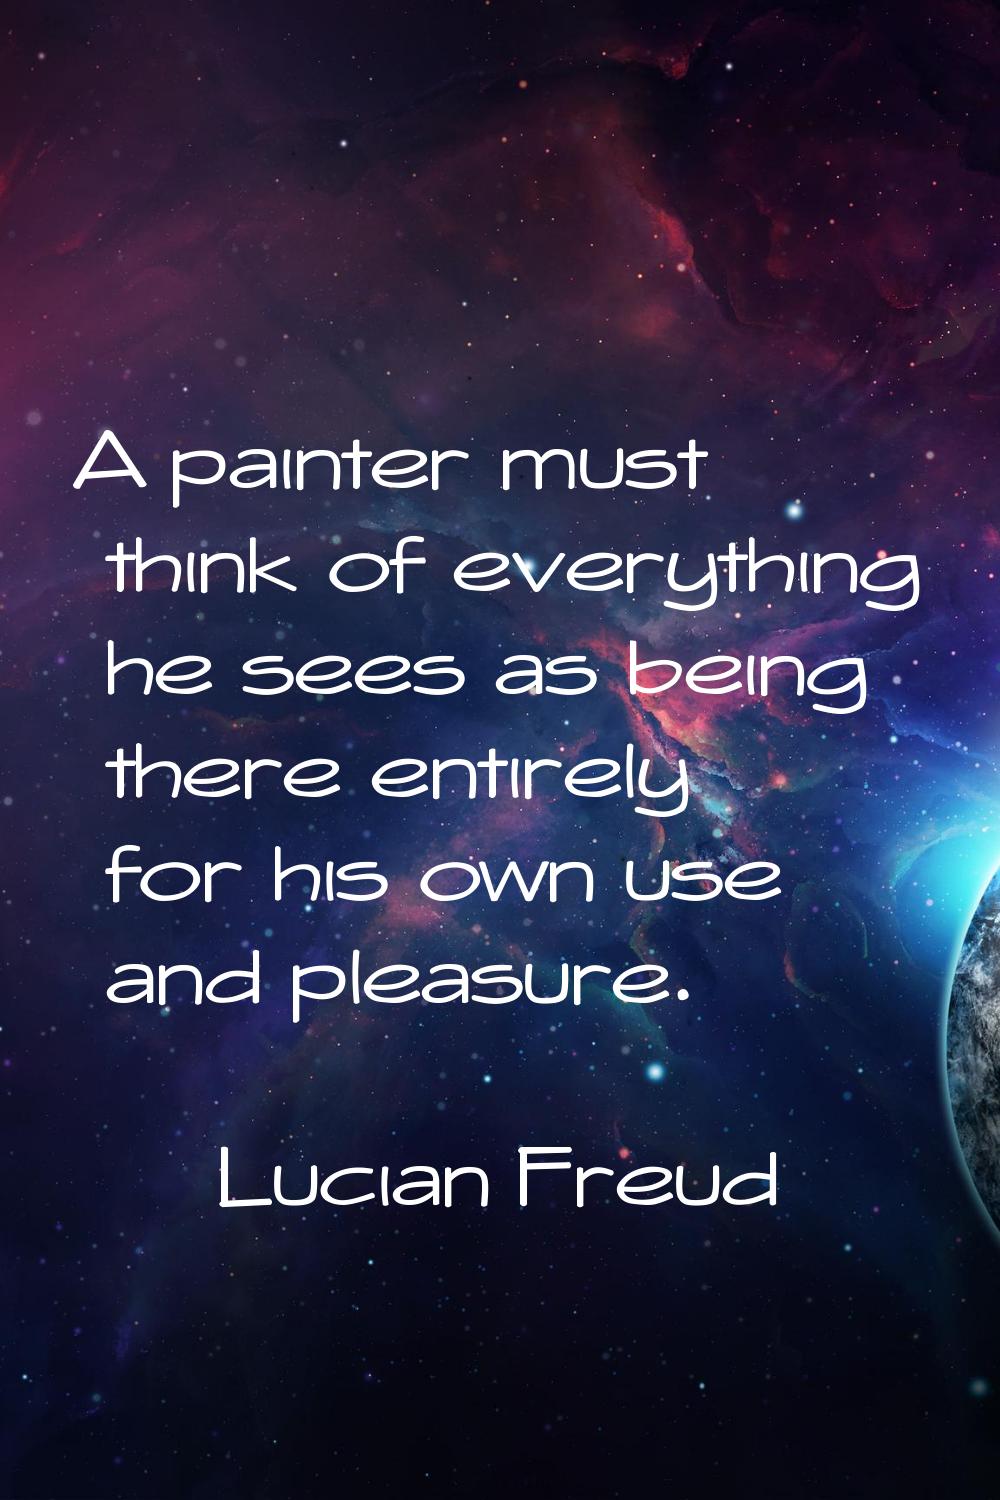 A painter must think of everything he sees as being there entirely for his own use and pleasure.